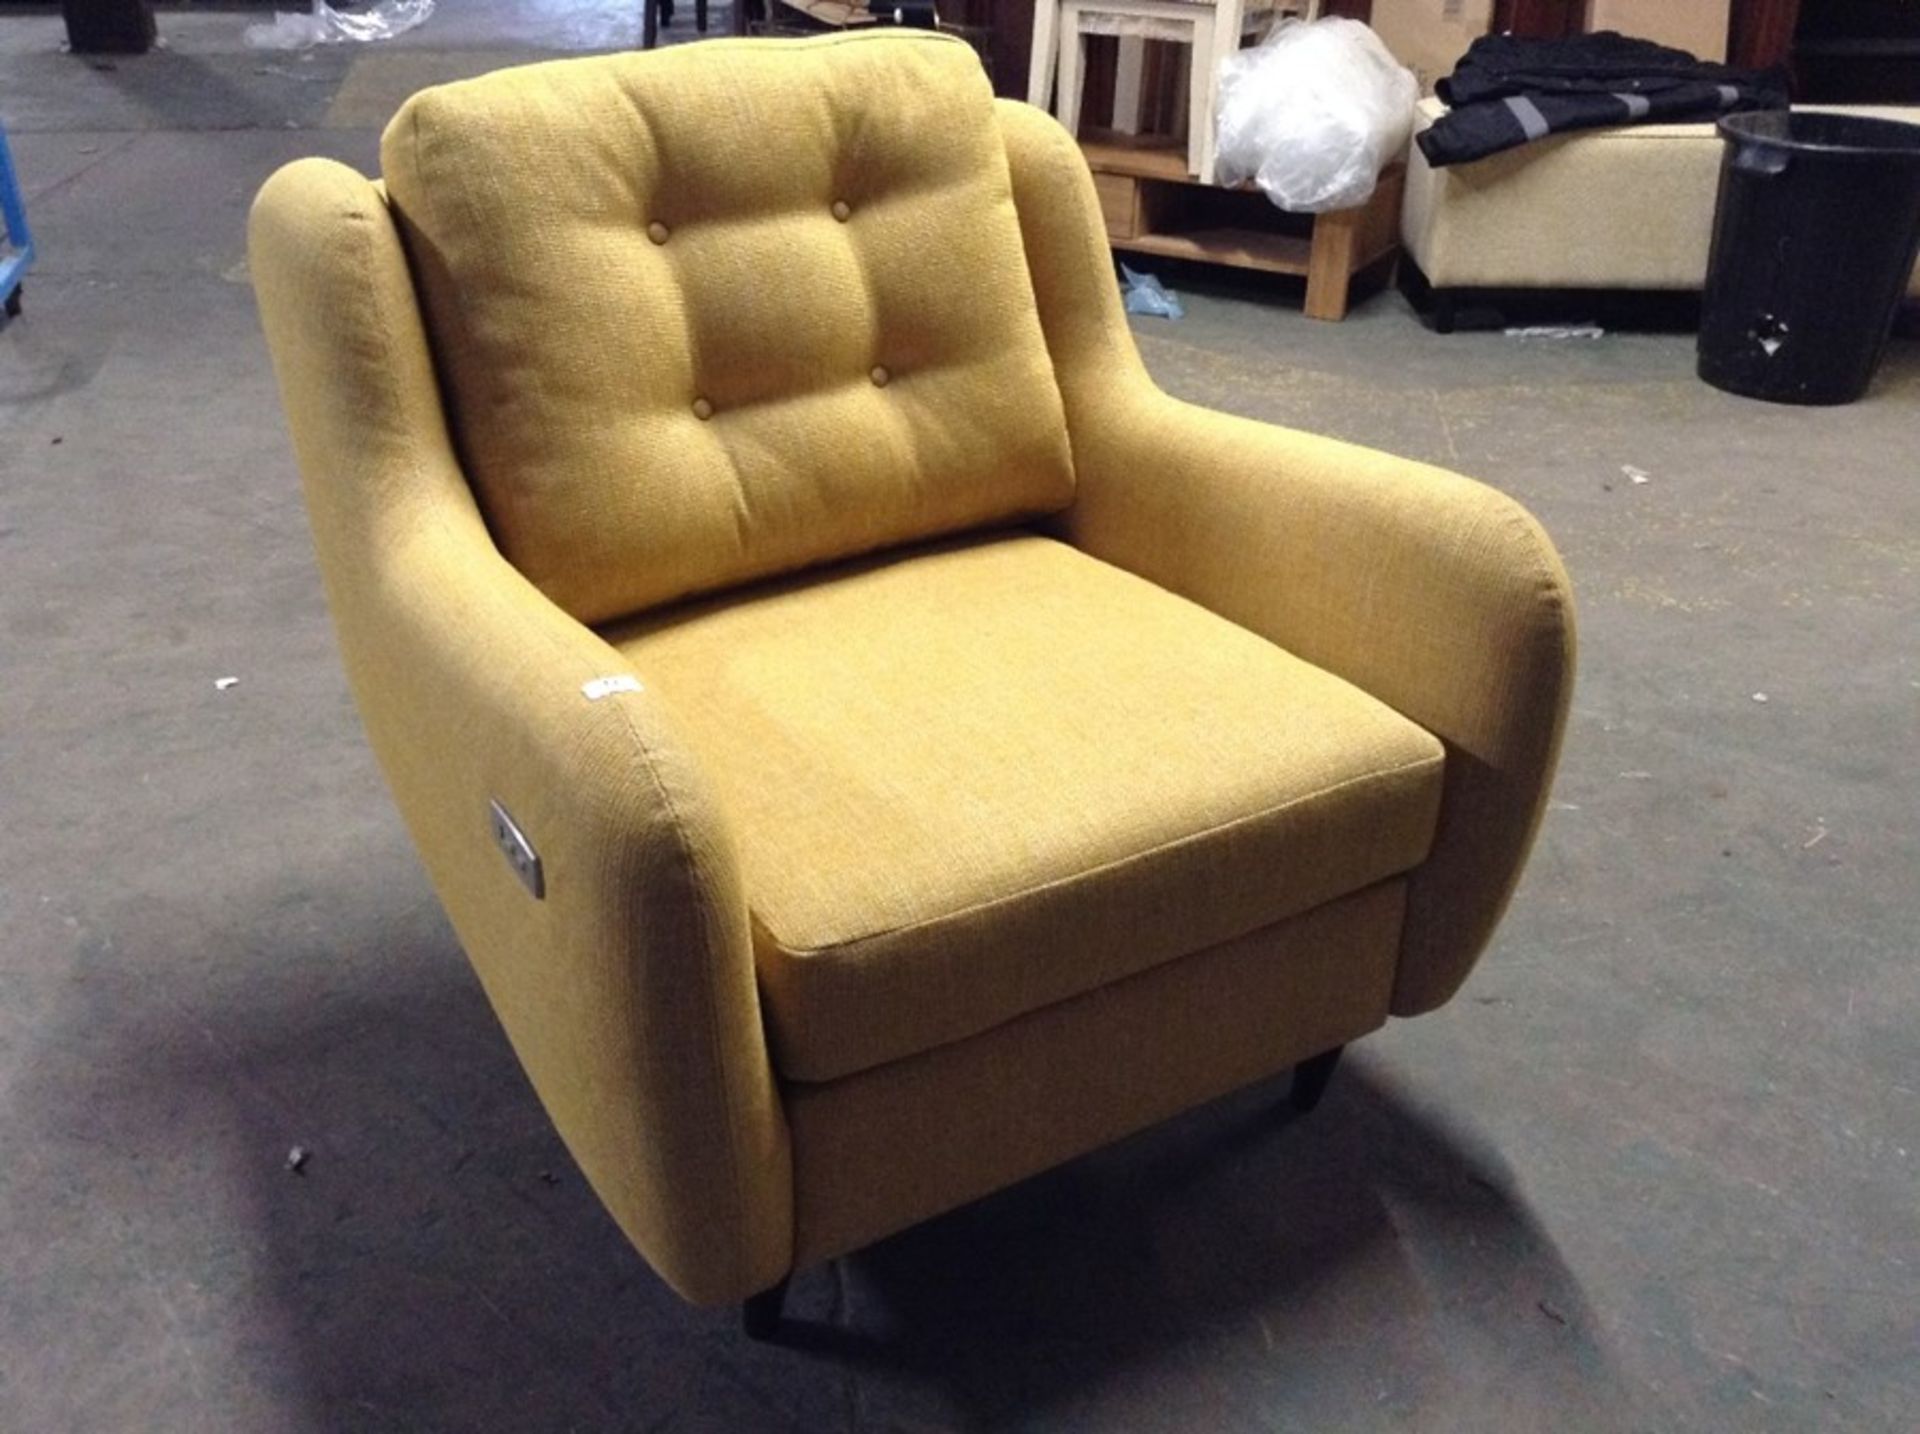 EX SHOWROOM YELLOW FABRIC ELECTRIC RECLINING CHAIR